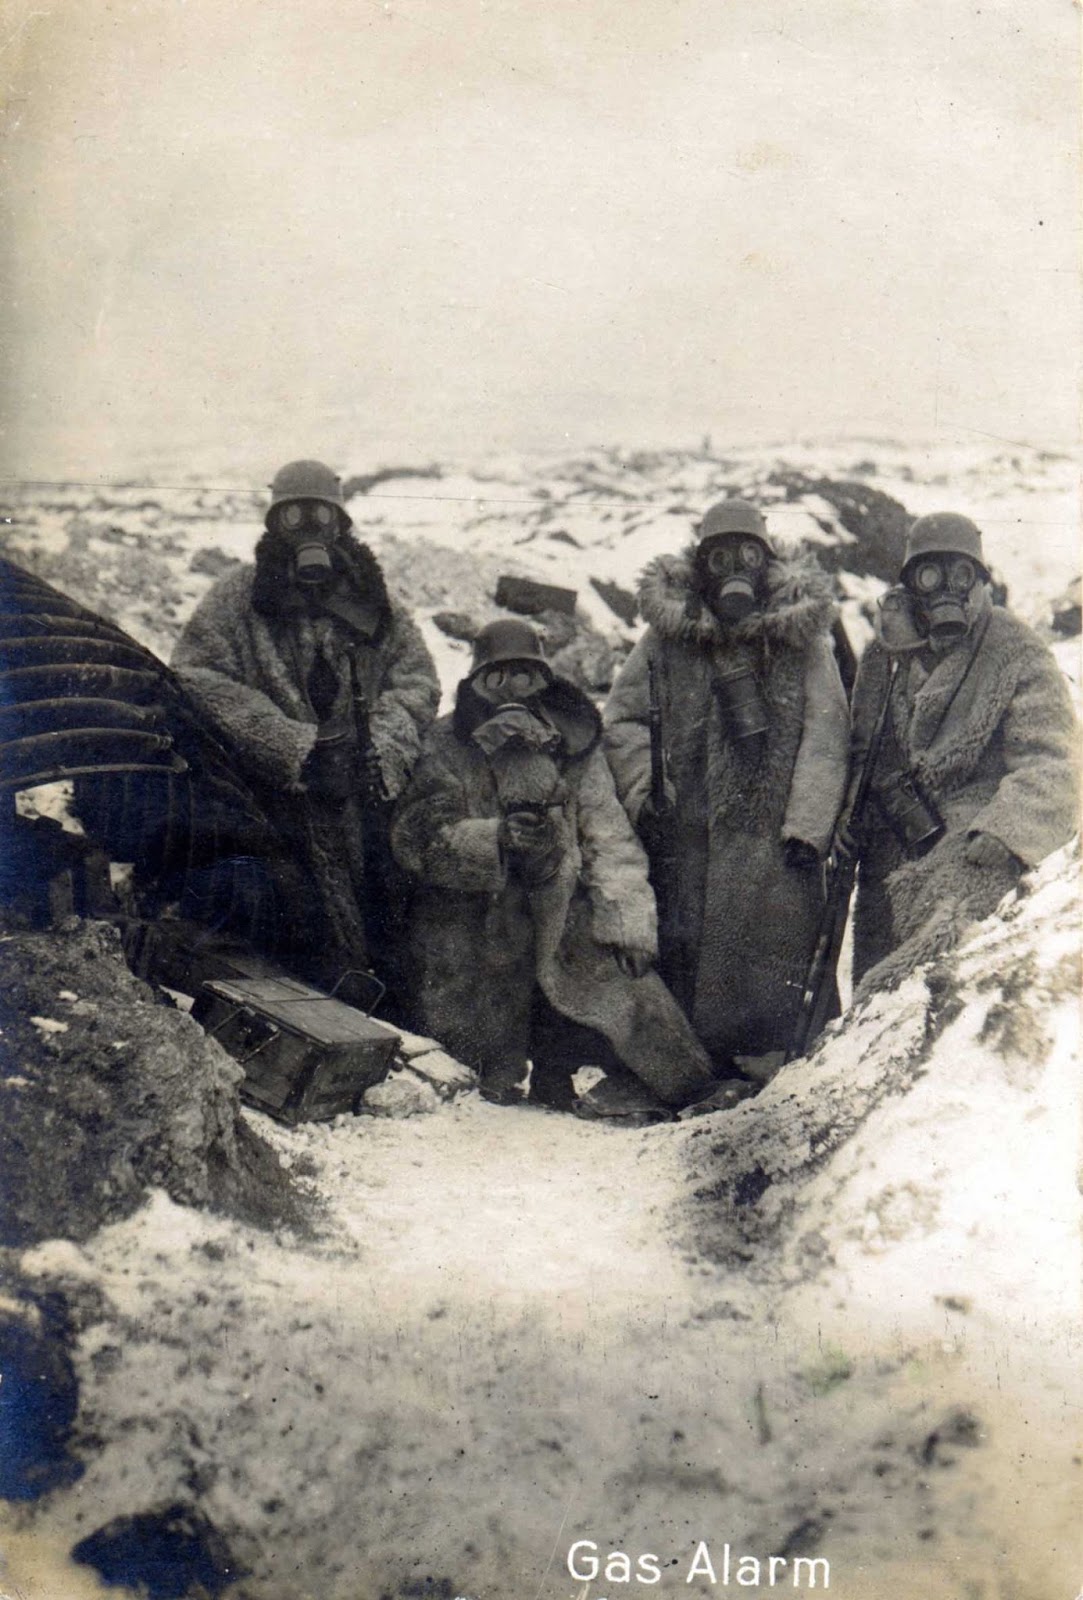 Four German soldiers wearing fur coats and gas masks in a trench, 1917.